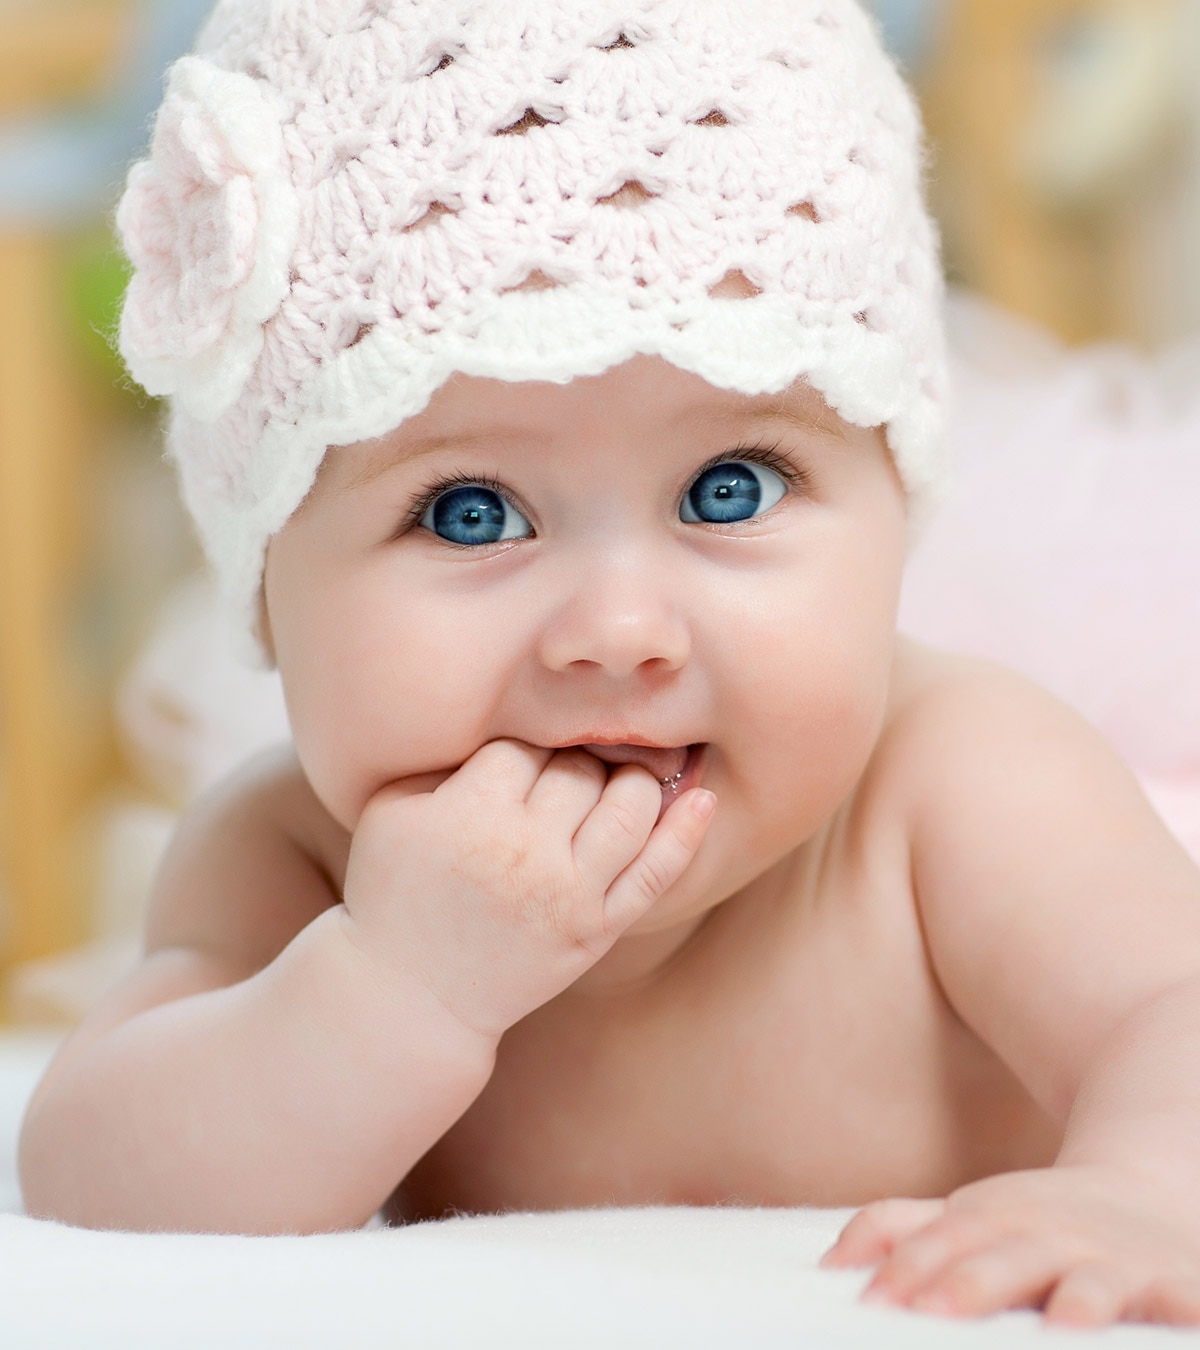 175+ Beautiful And Unique Christian Baby Girl Names With Meanings